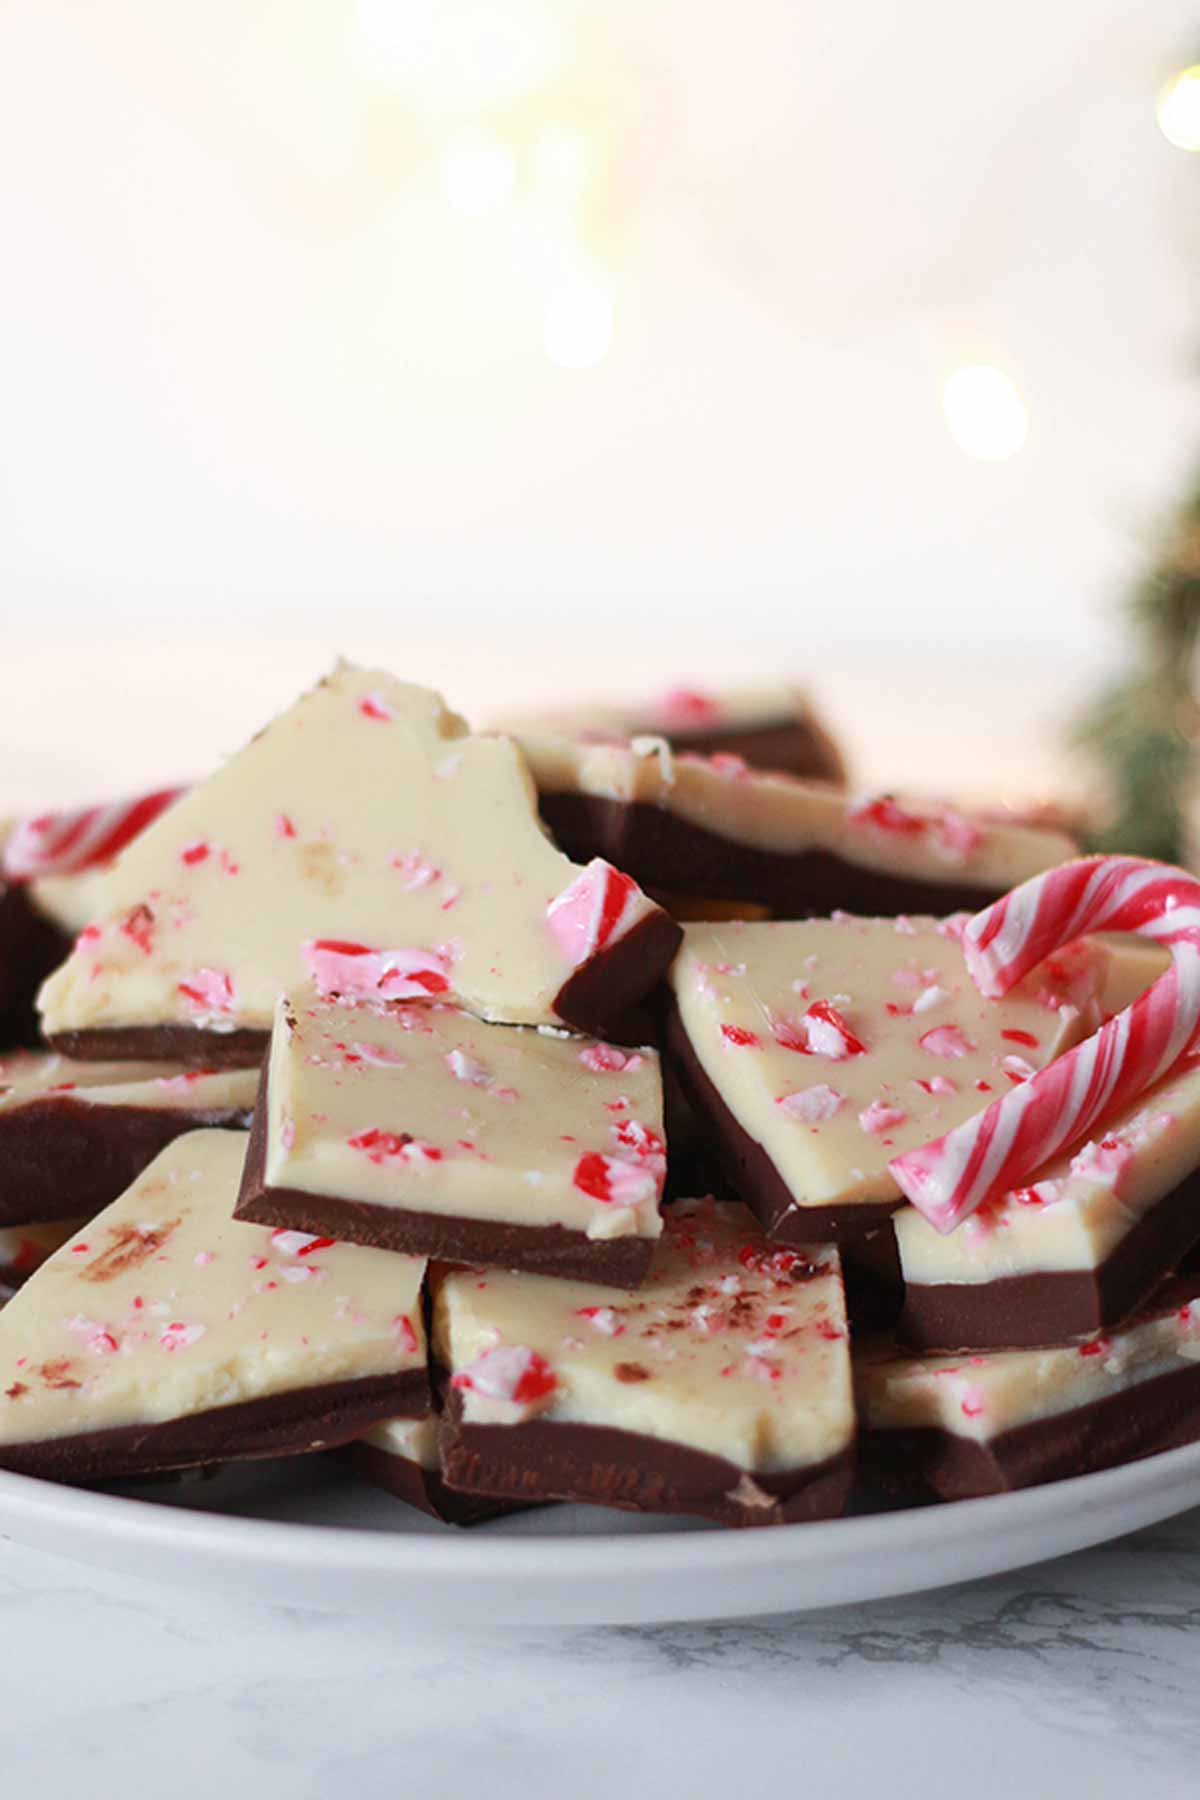 Plate Full Of Chocolate Bark With Some Miniature Candy Canes